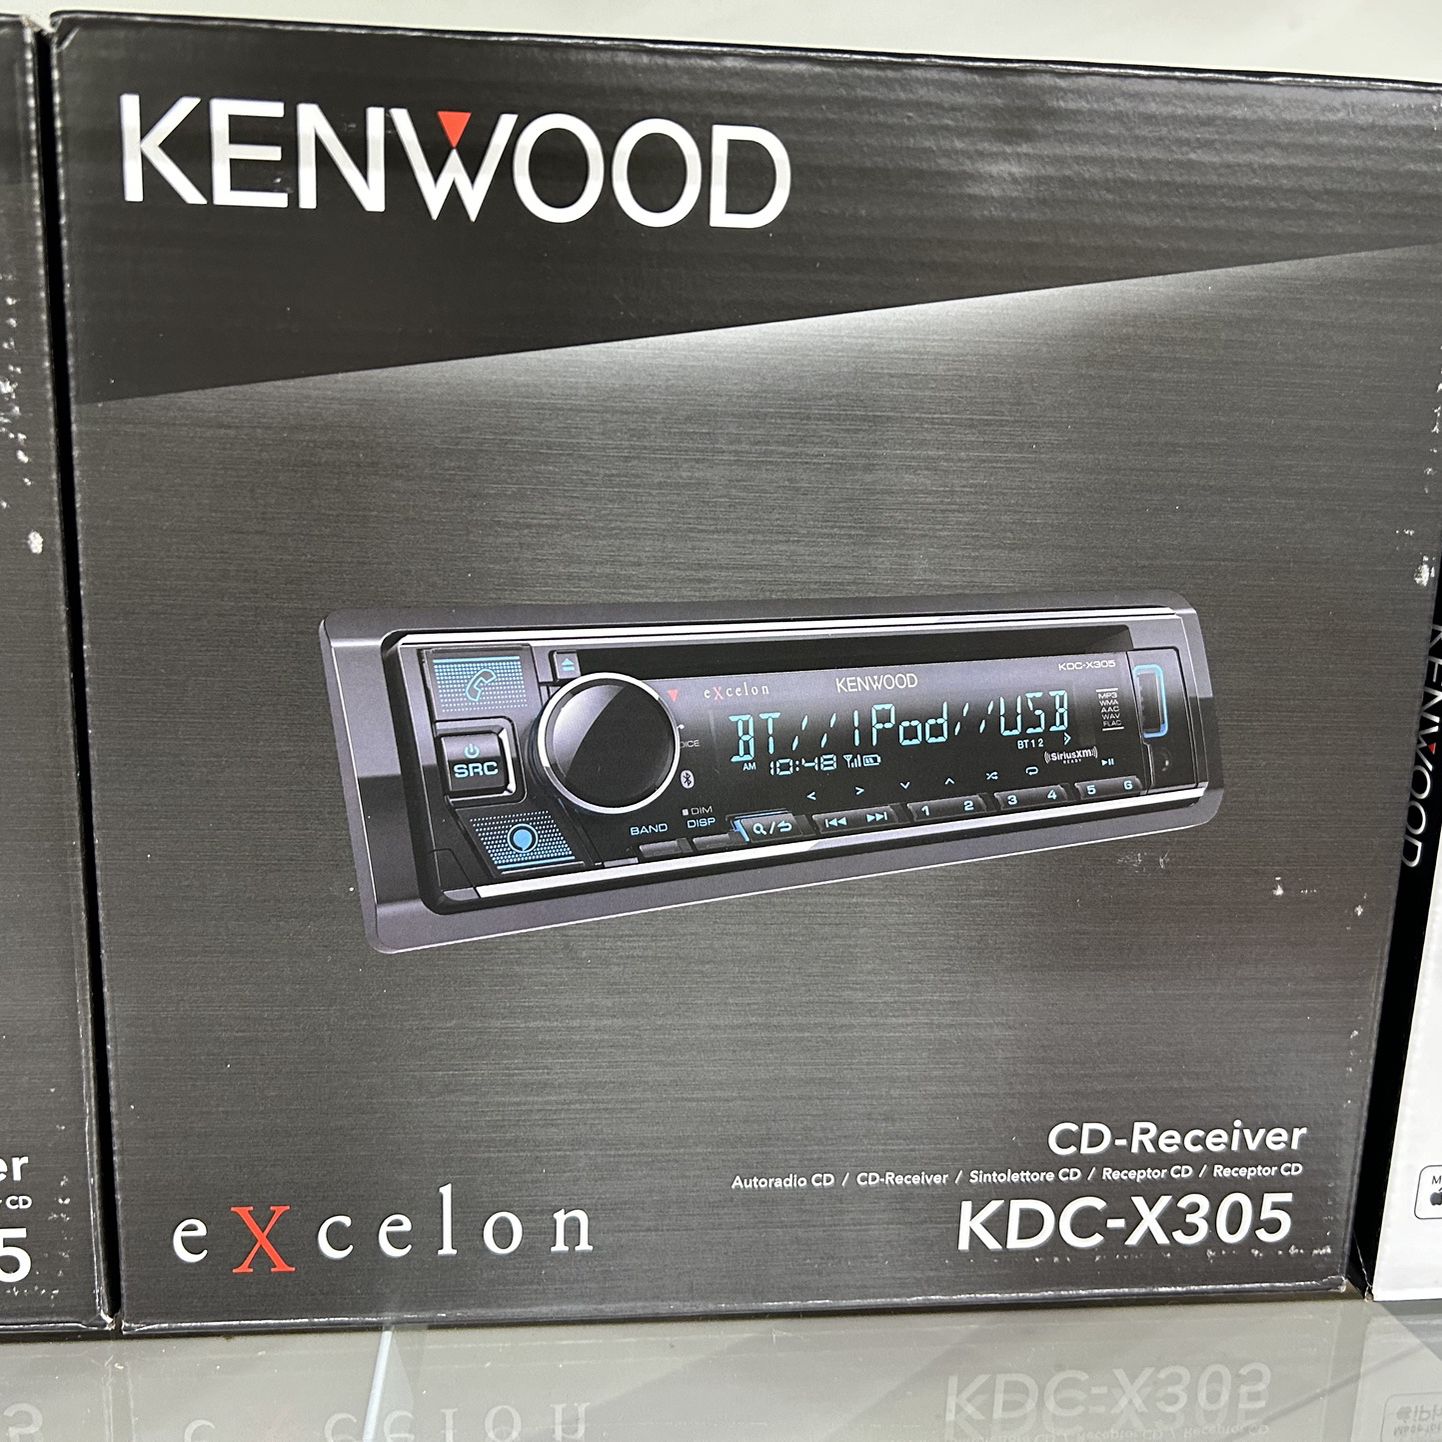 Kenwood Excelon KDC-X305 Am/Fm Cd Player, Stereo System, Bluetooth